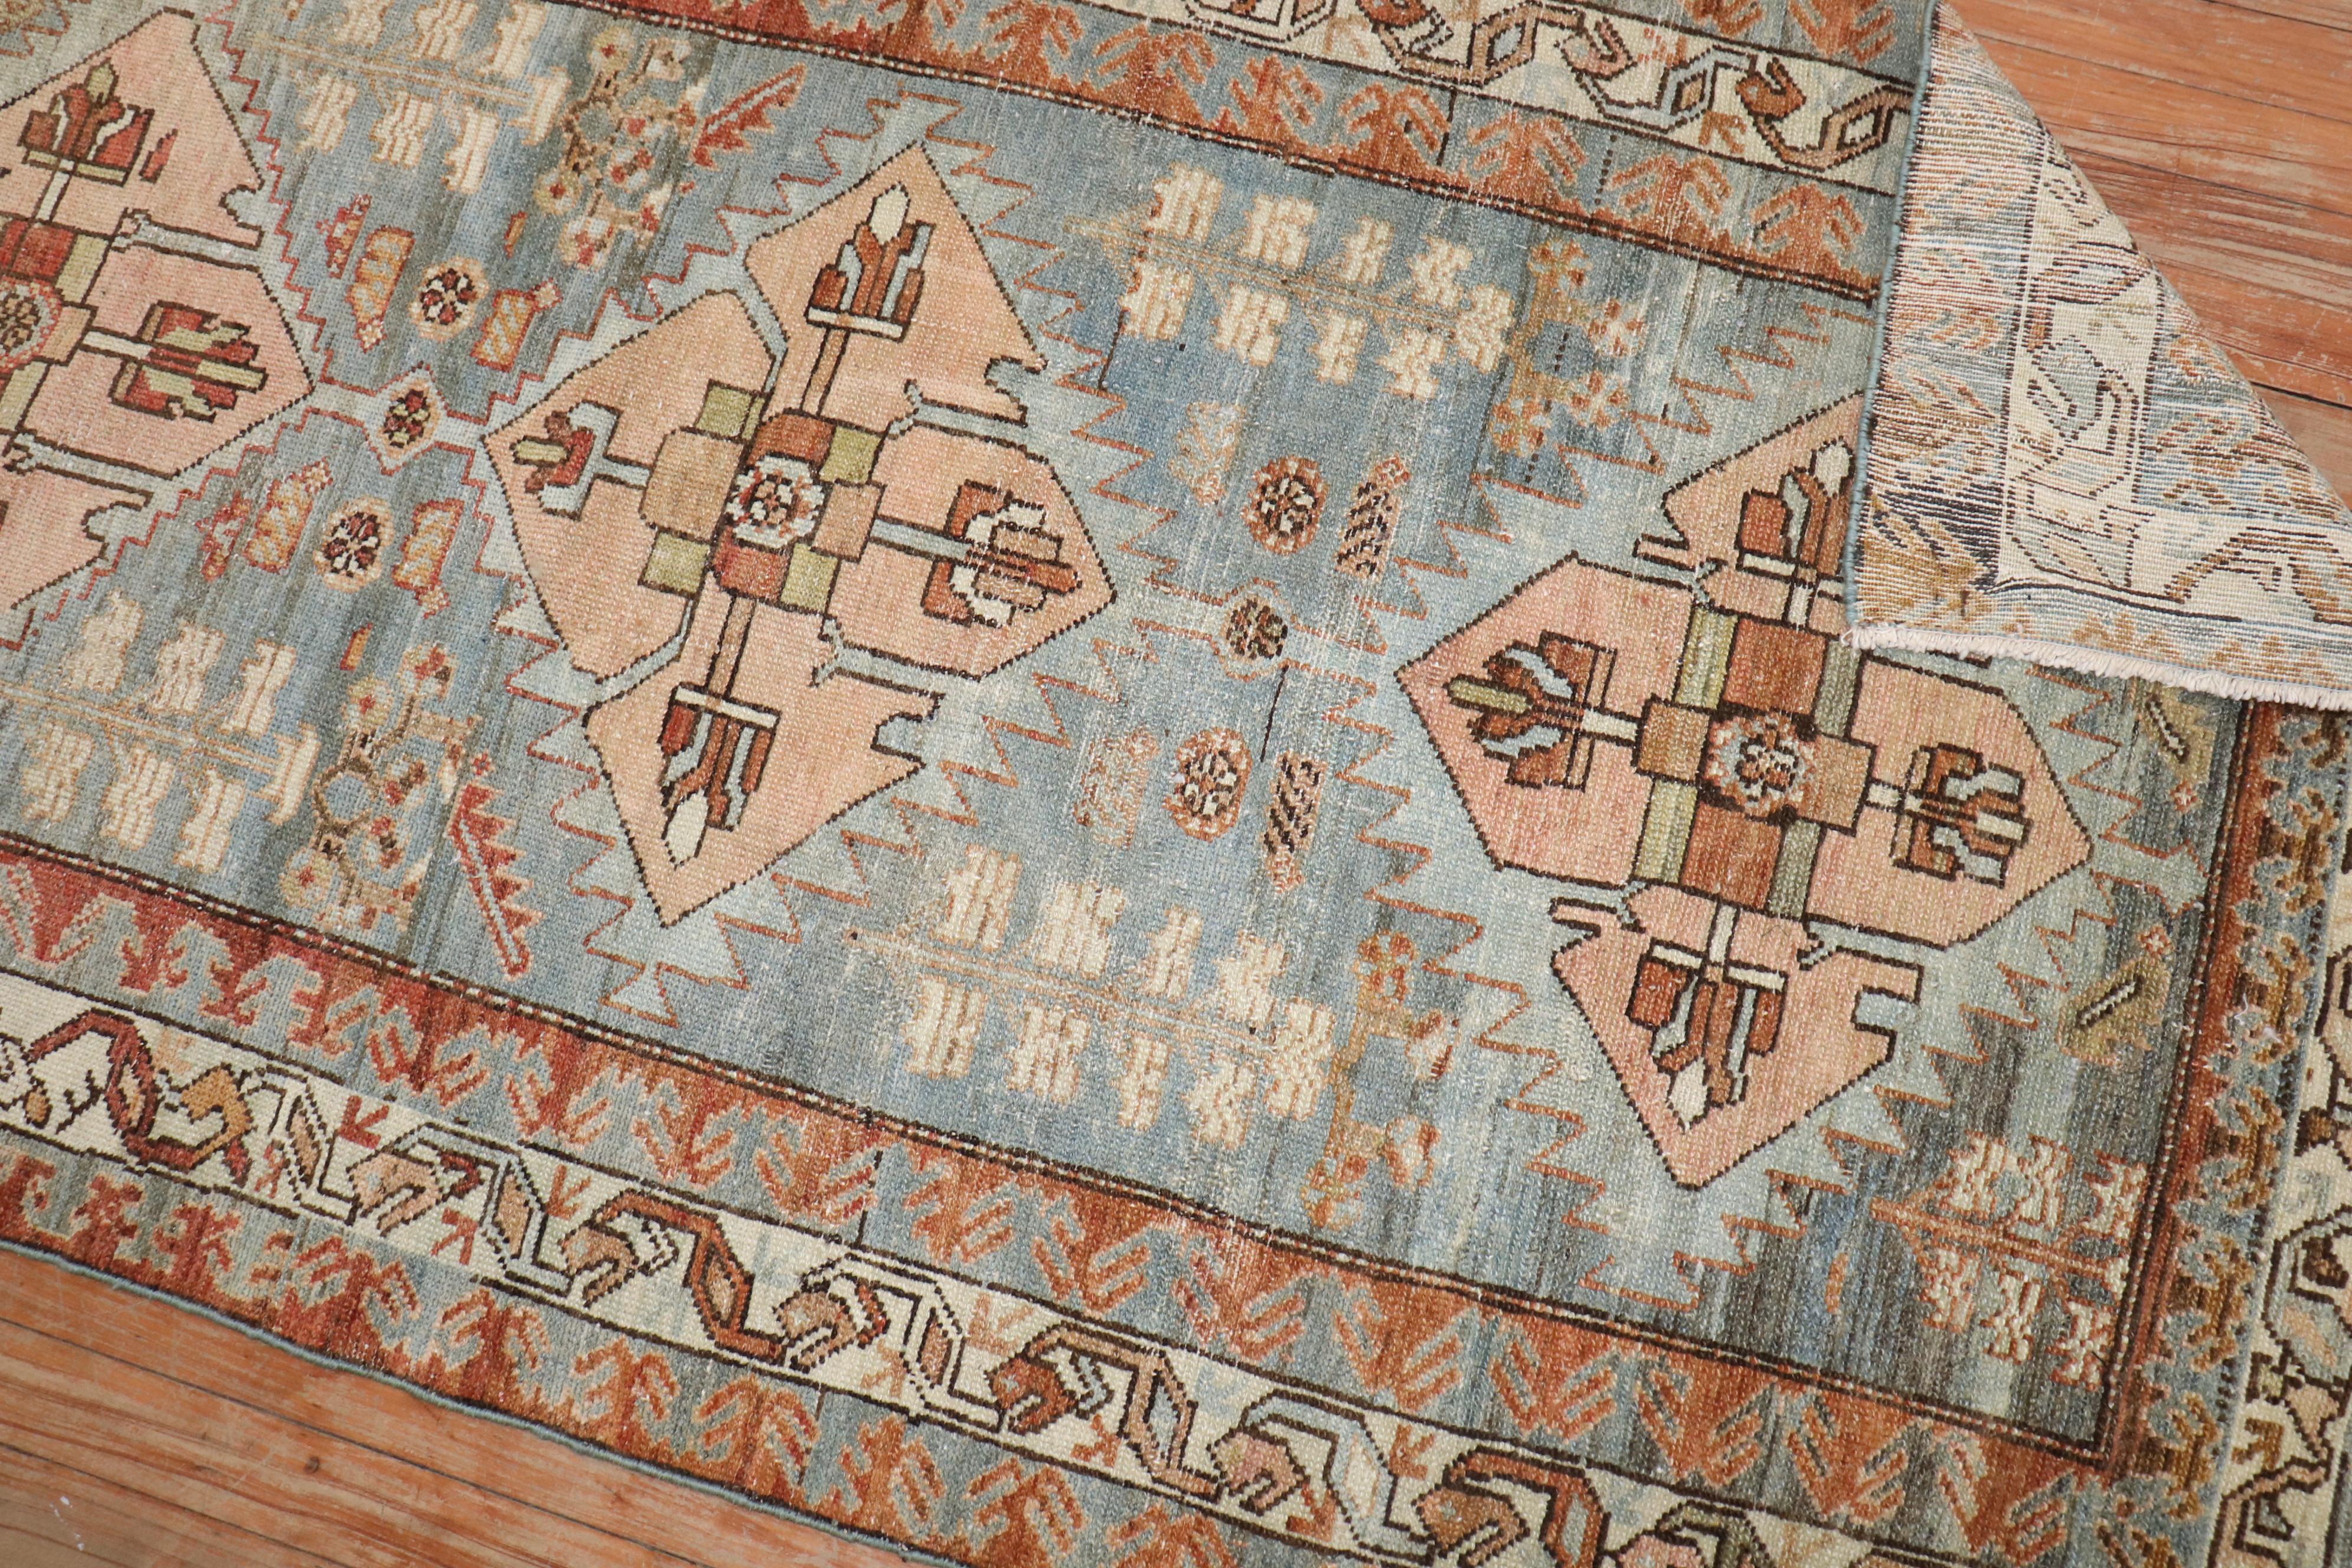 1920s Persian Malayer small geometric rug

Details
rug no.	j2713
size	3' 3